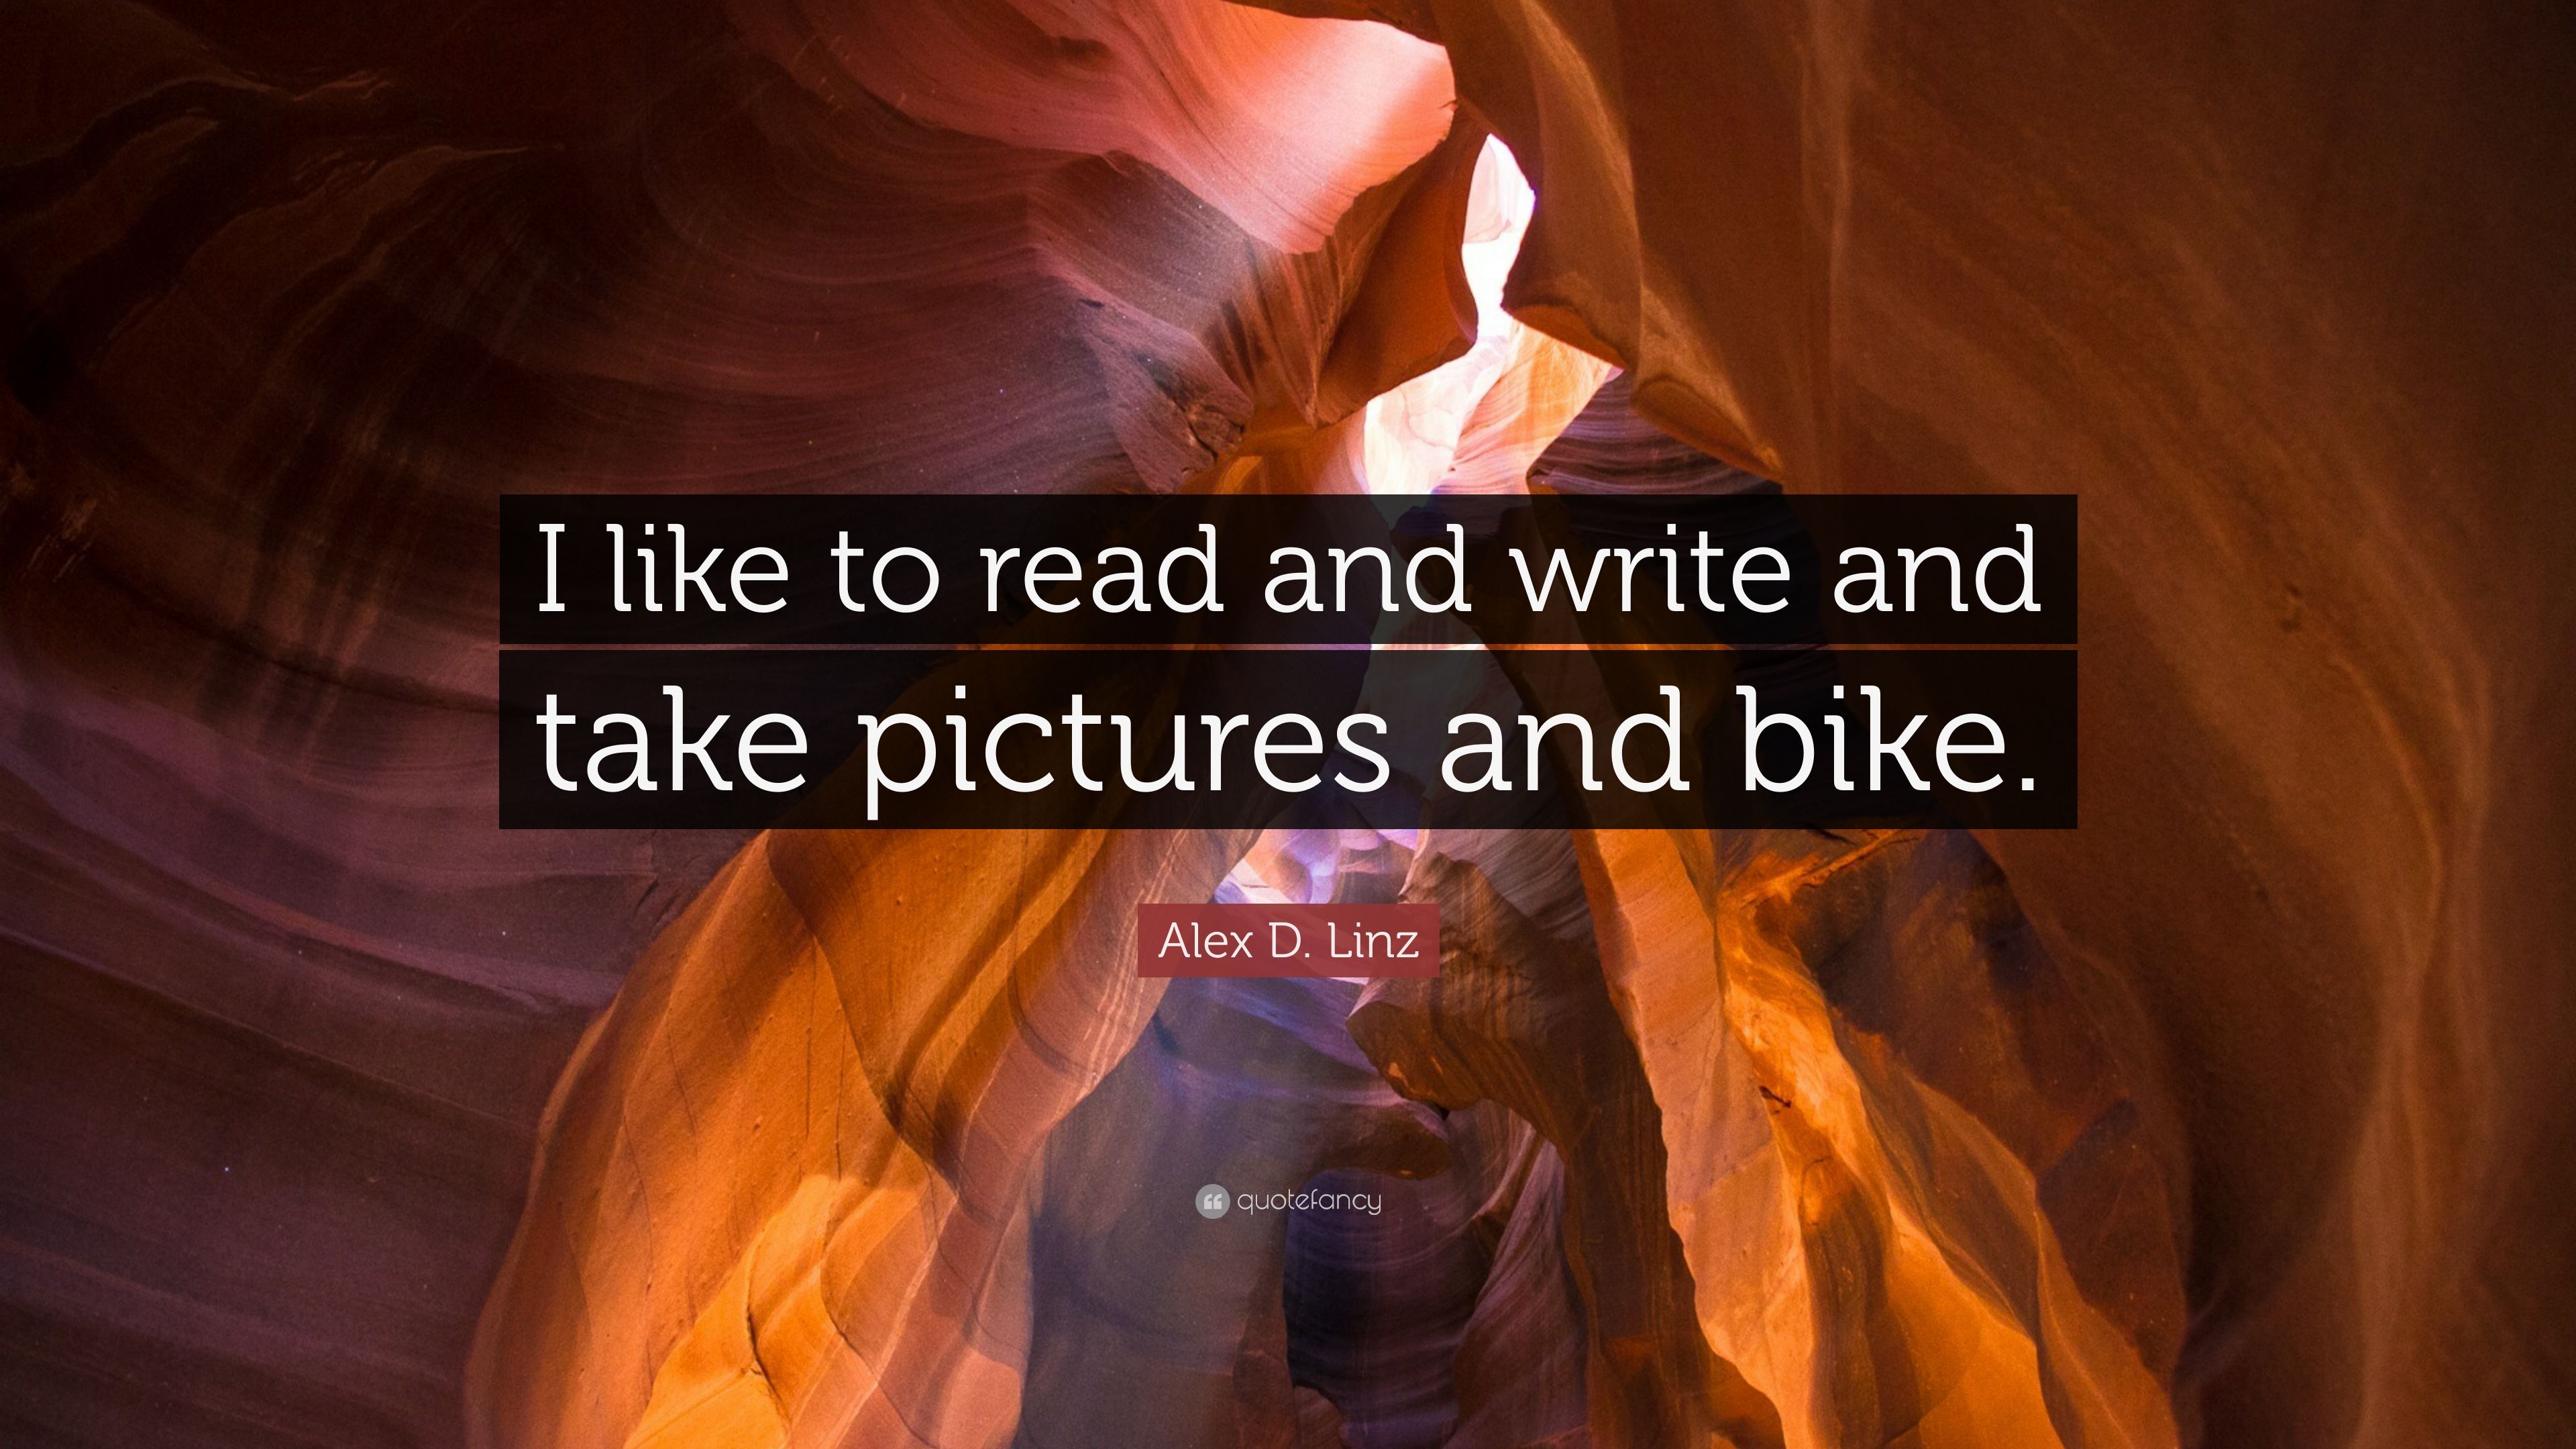 Alex D. Linz Quote: “I like to read and write and take picture